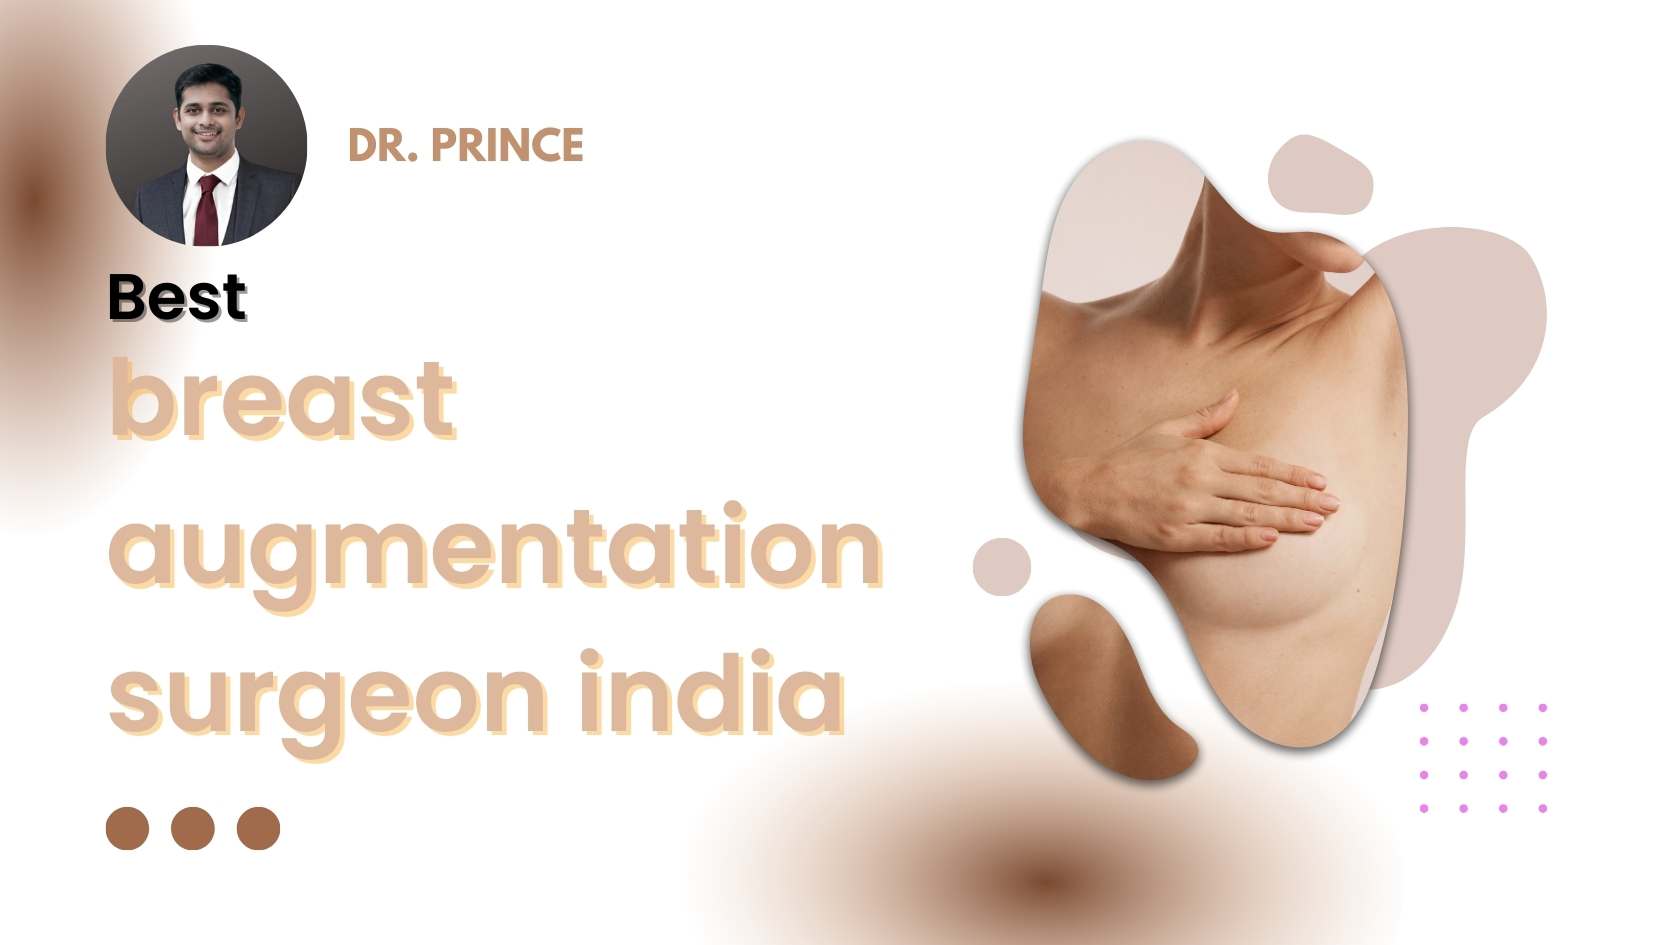 Dr. Prince performing breast augmentation surgery